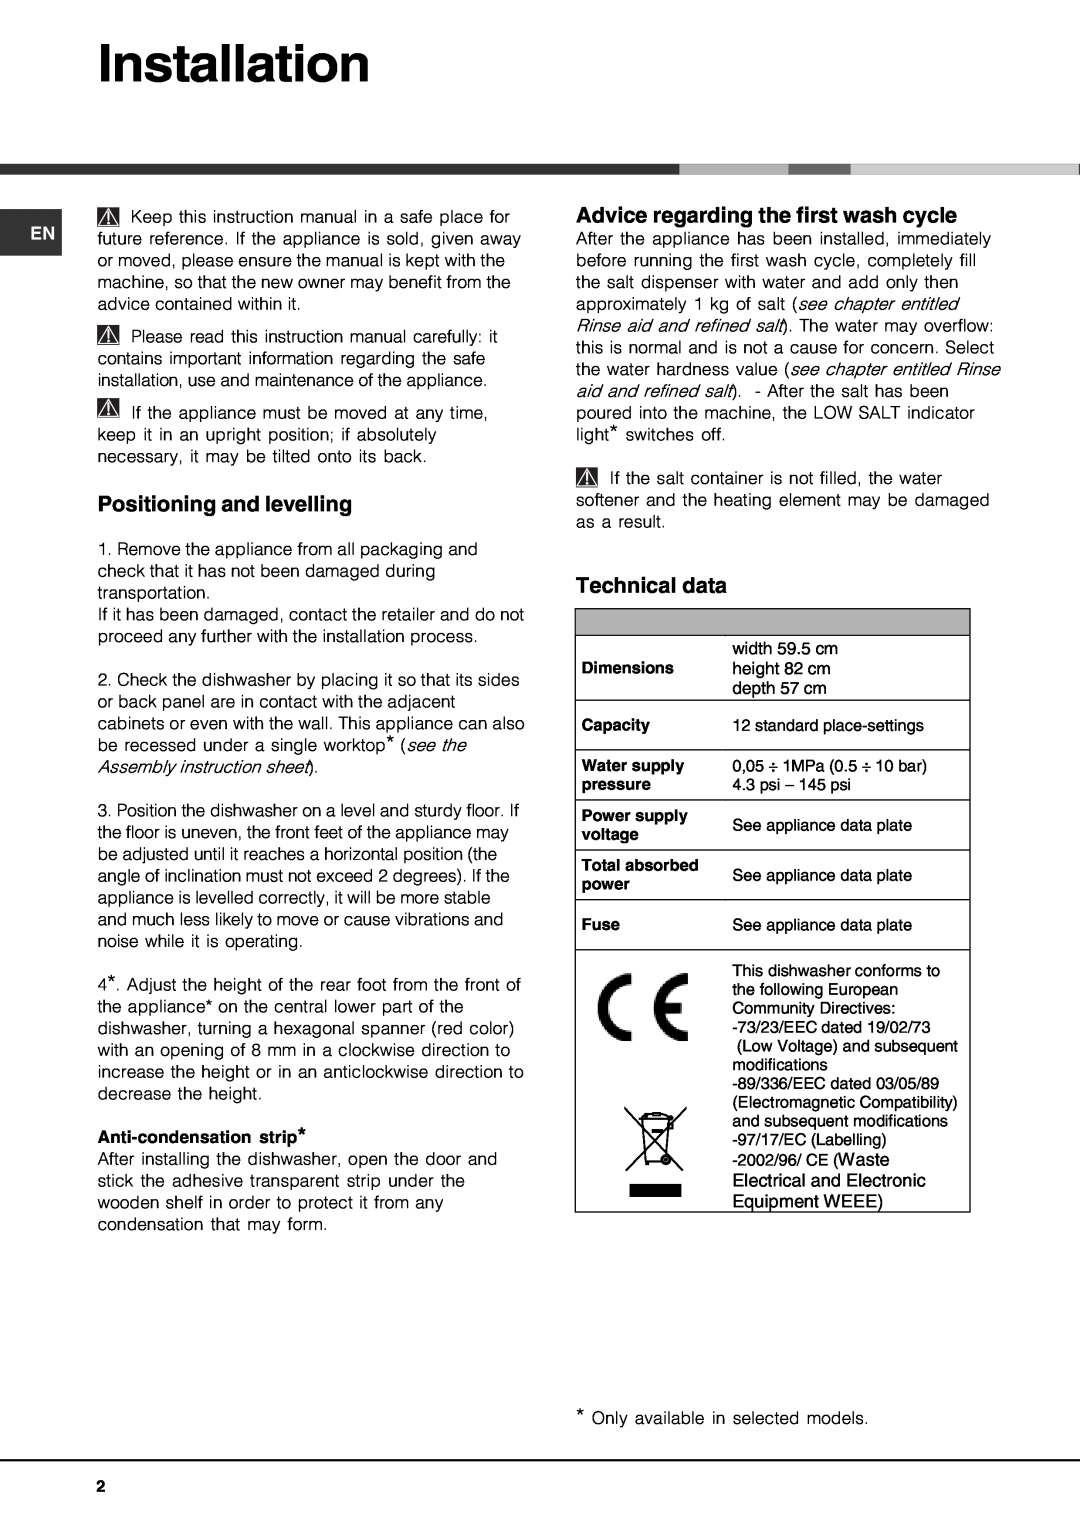 Hotpoint FDM 550 manual Installation, Positioning and levelling, Advice regarding the first wash cycle, Technical data 